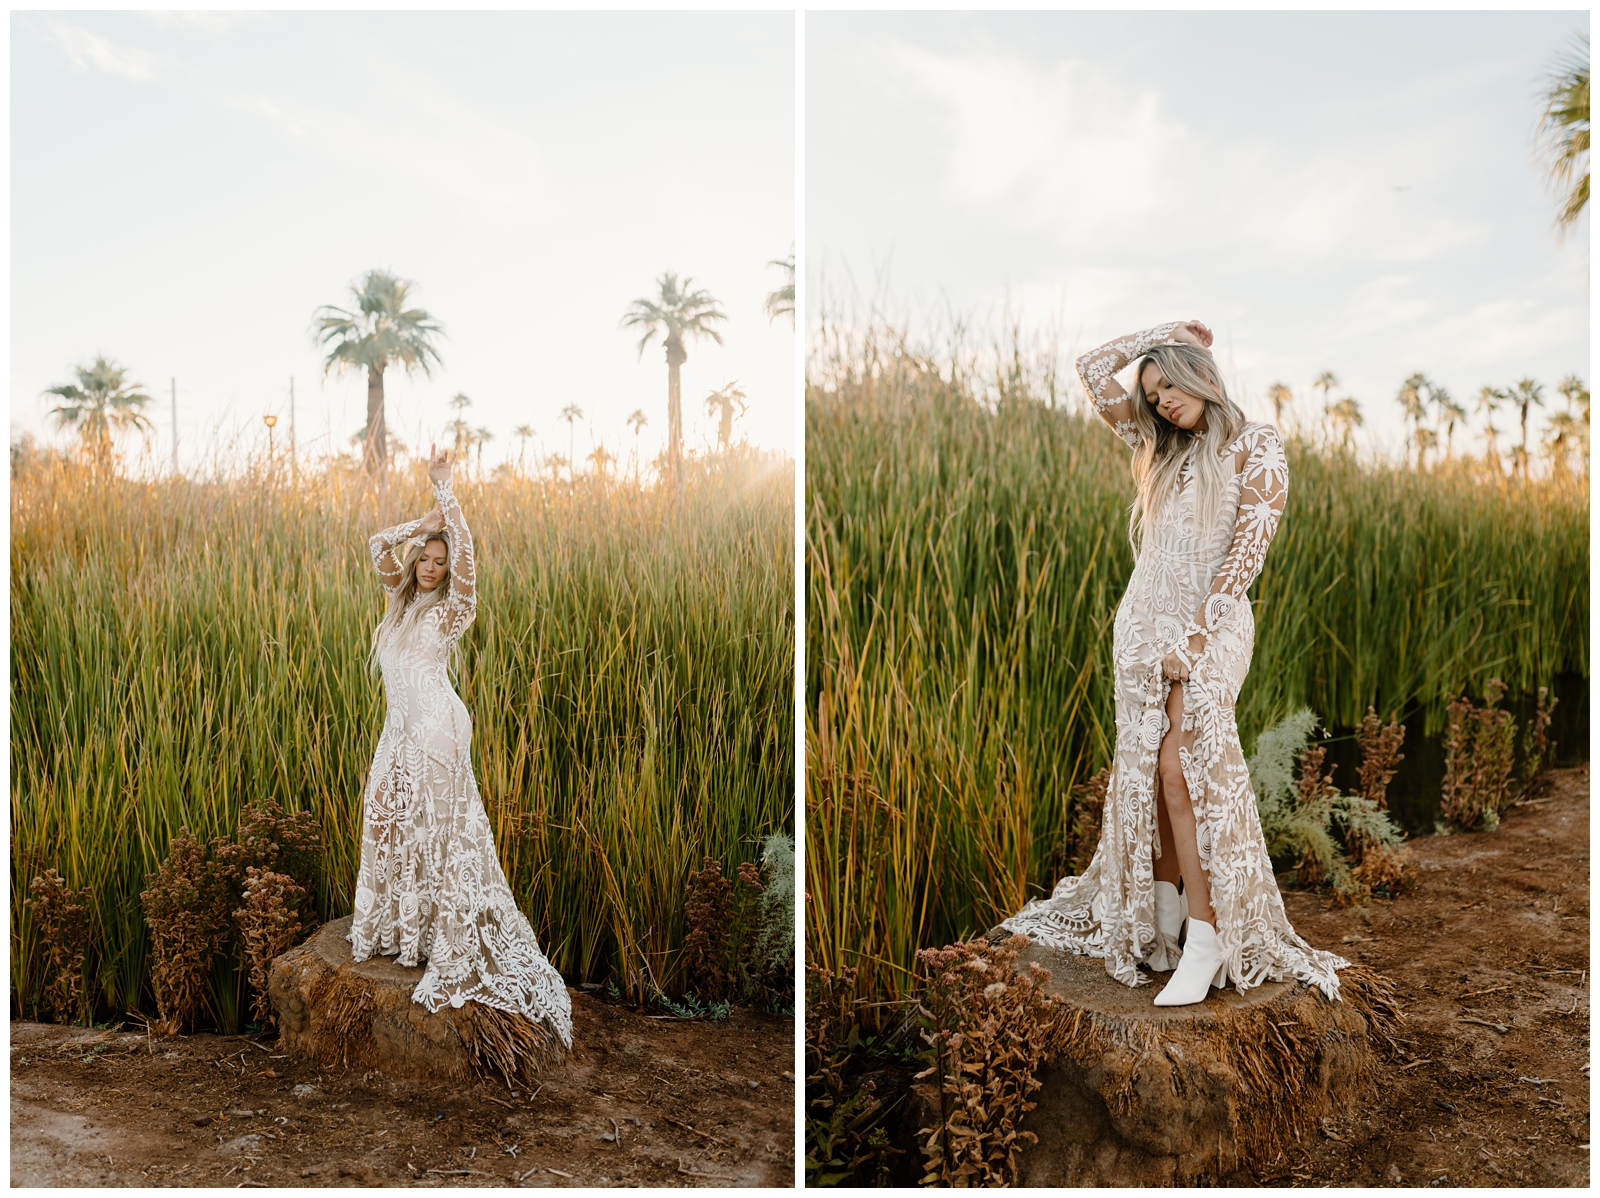 Boho bridal session with palm trees and tall grass in Scottsdale, AZ